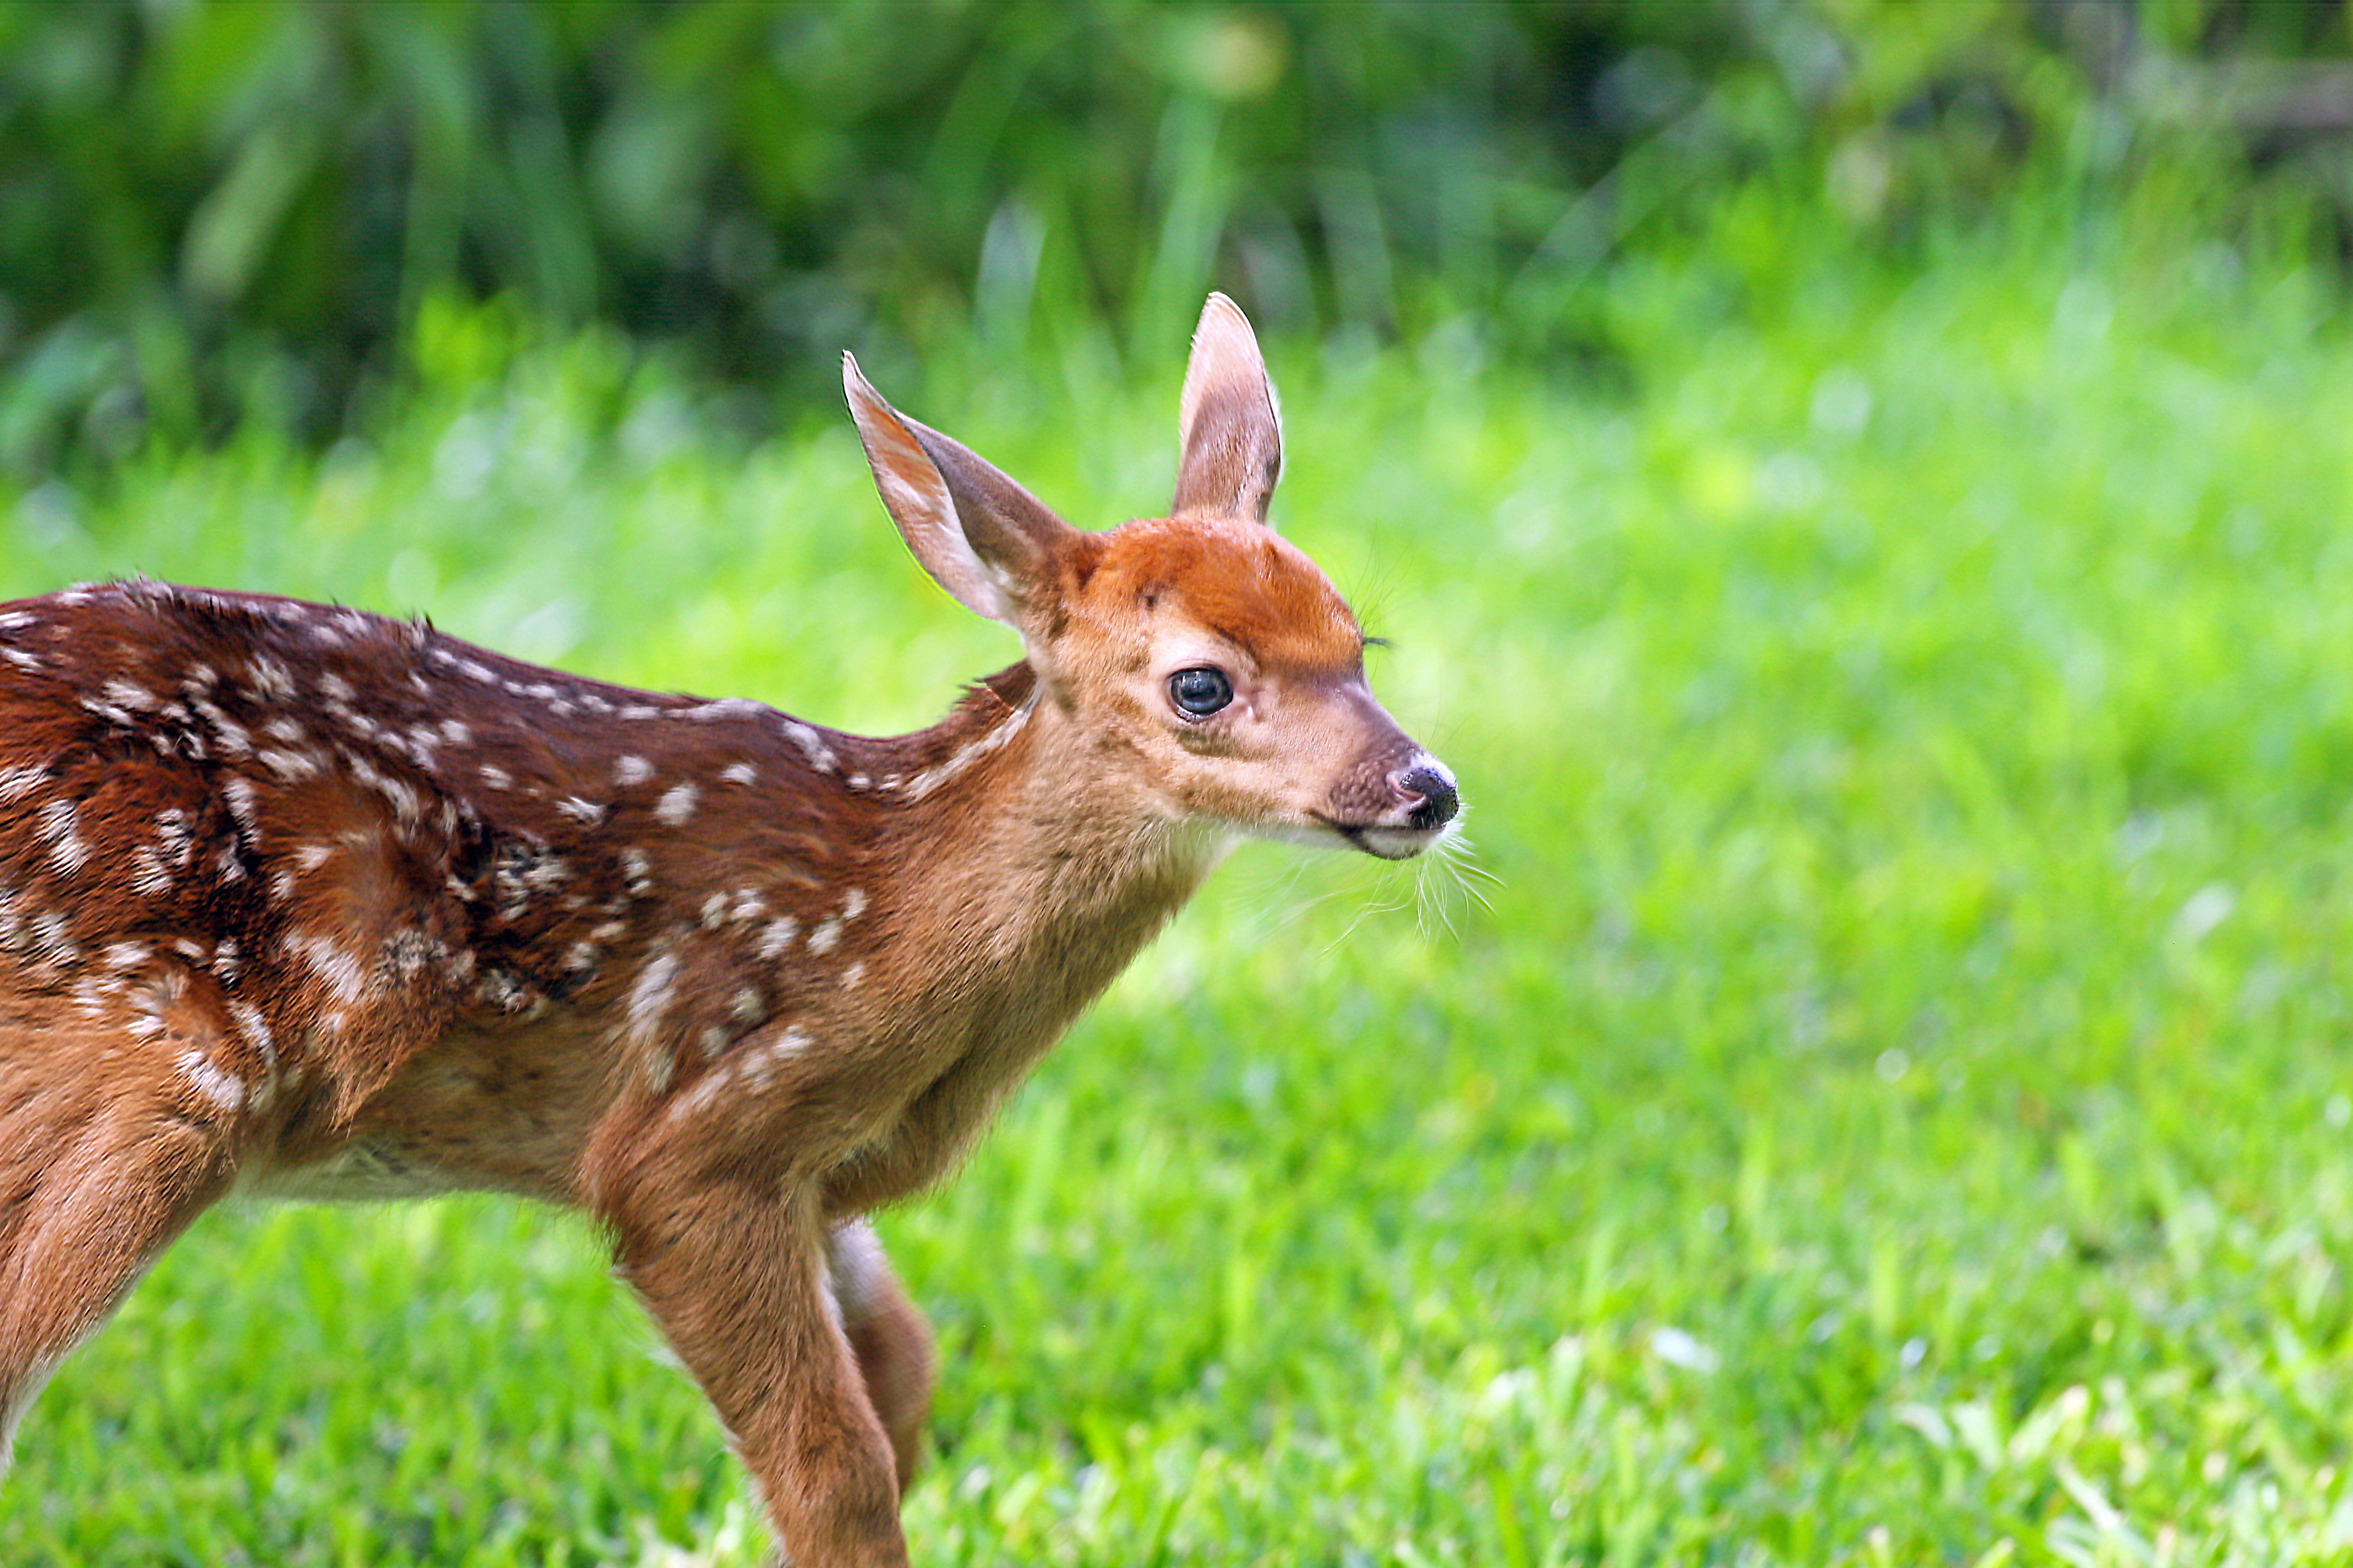 Dog Saves Baby Deer From Drowning on Video | Time